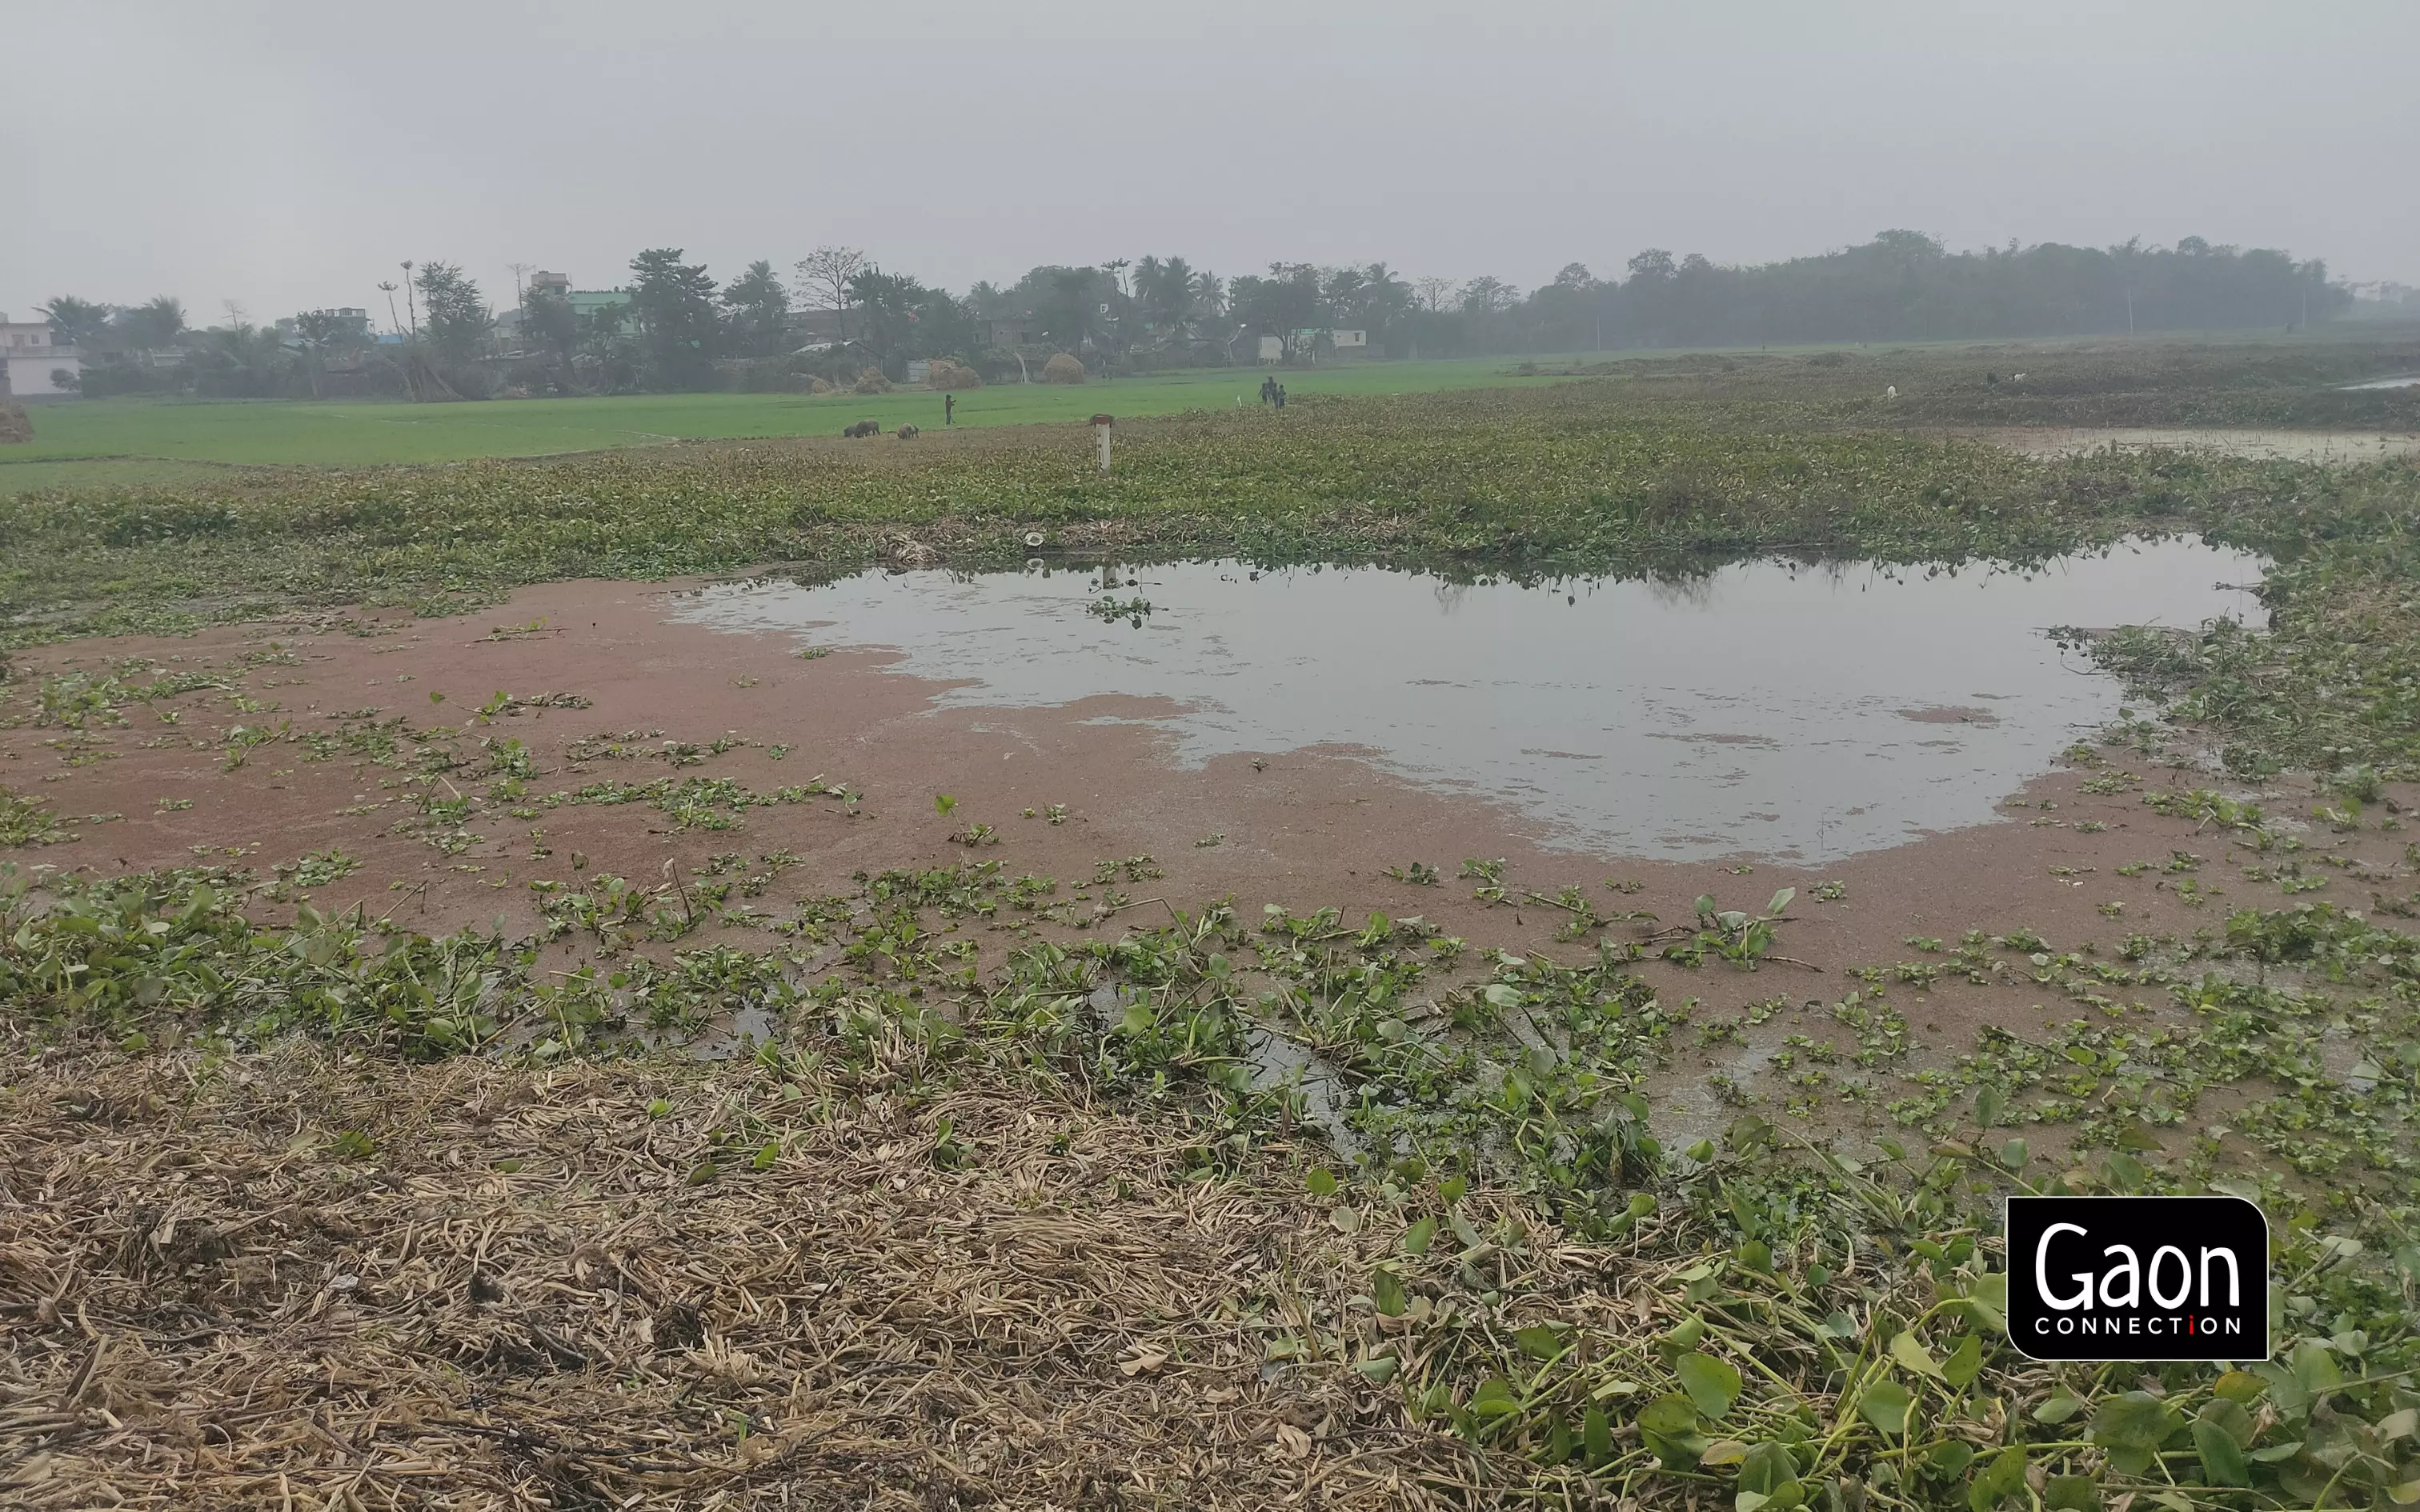 In Saharsa and Supaul, where the makhana is cultivated, there are no processing units nearby. The closest units are in Darbhanga and Madhubani nearly 100 kilometres away. Photo by Rahul Jha